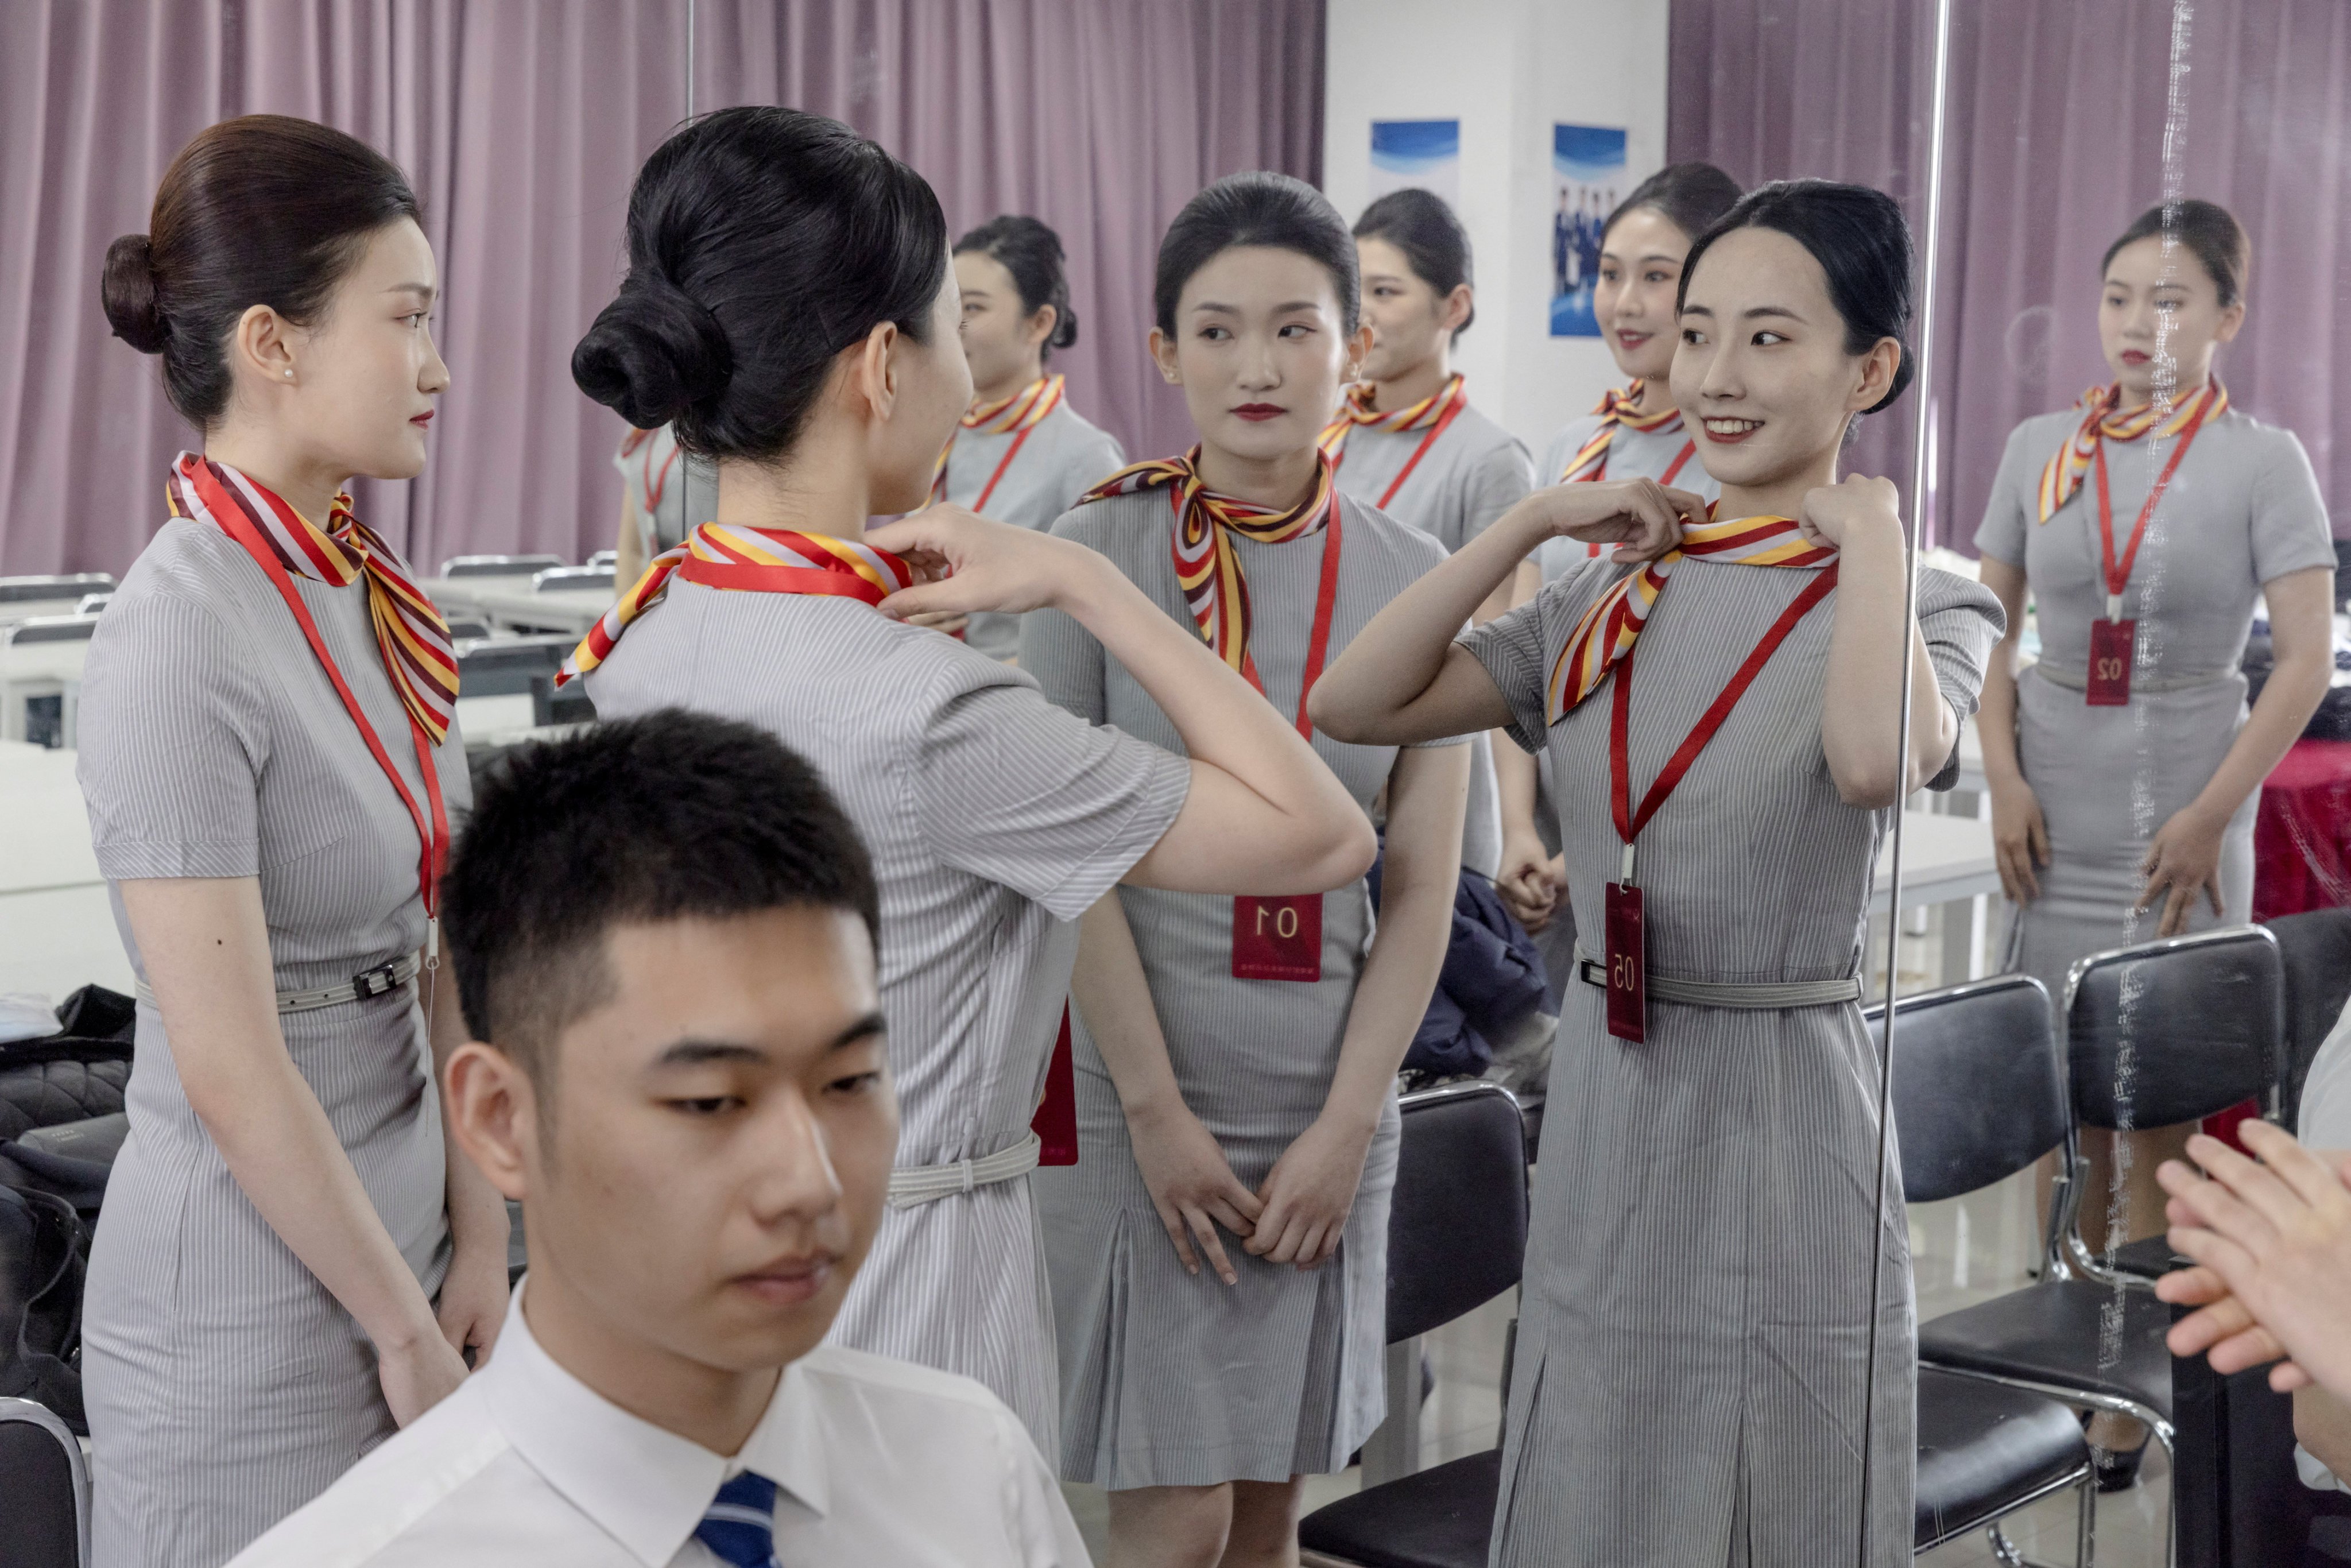 Applicants check their appearance before being tested during a recruiting session for cabin crew jobs at Hainan Airlines in Beijing, on March 30. Photo: Reuters